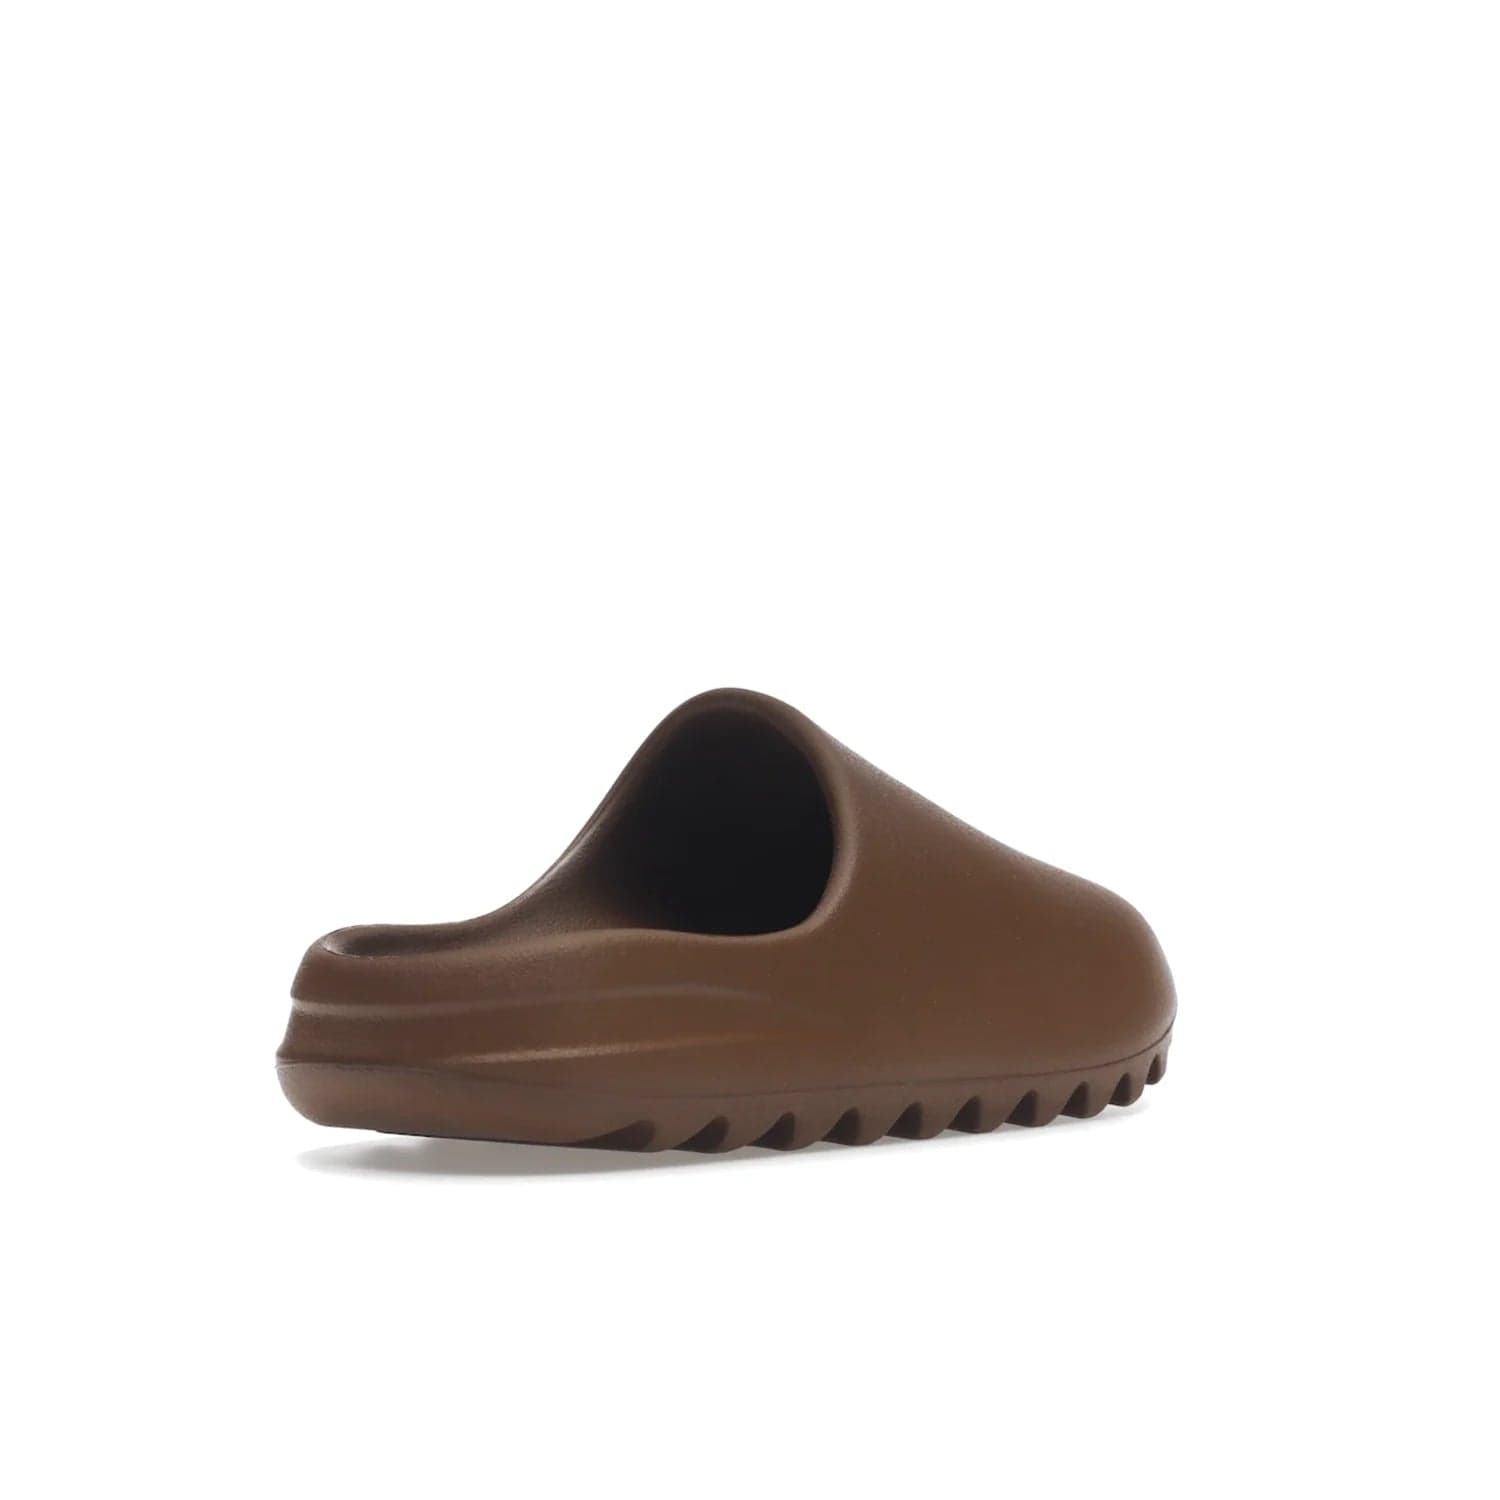 adidas Yeezy Slide Flax - Image 32 - Only at www.BallersClubKickz.com - Score the perfect casual look with the adidas Yeezy Slide Flax. Made with lightweight injected EVA plus horizontal grooves underfoot for traction. Release on August 22, 2022. $70.